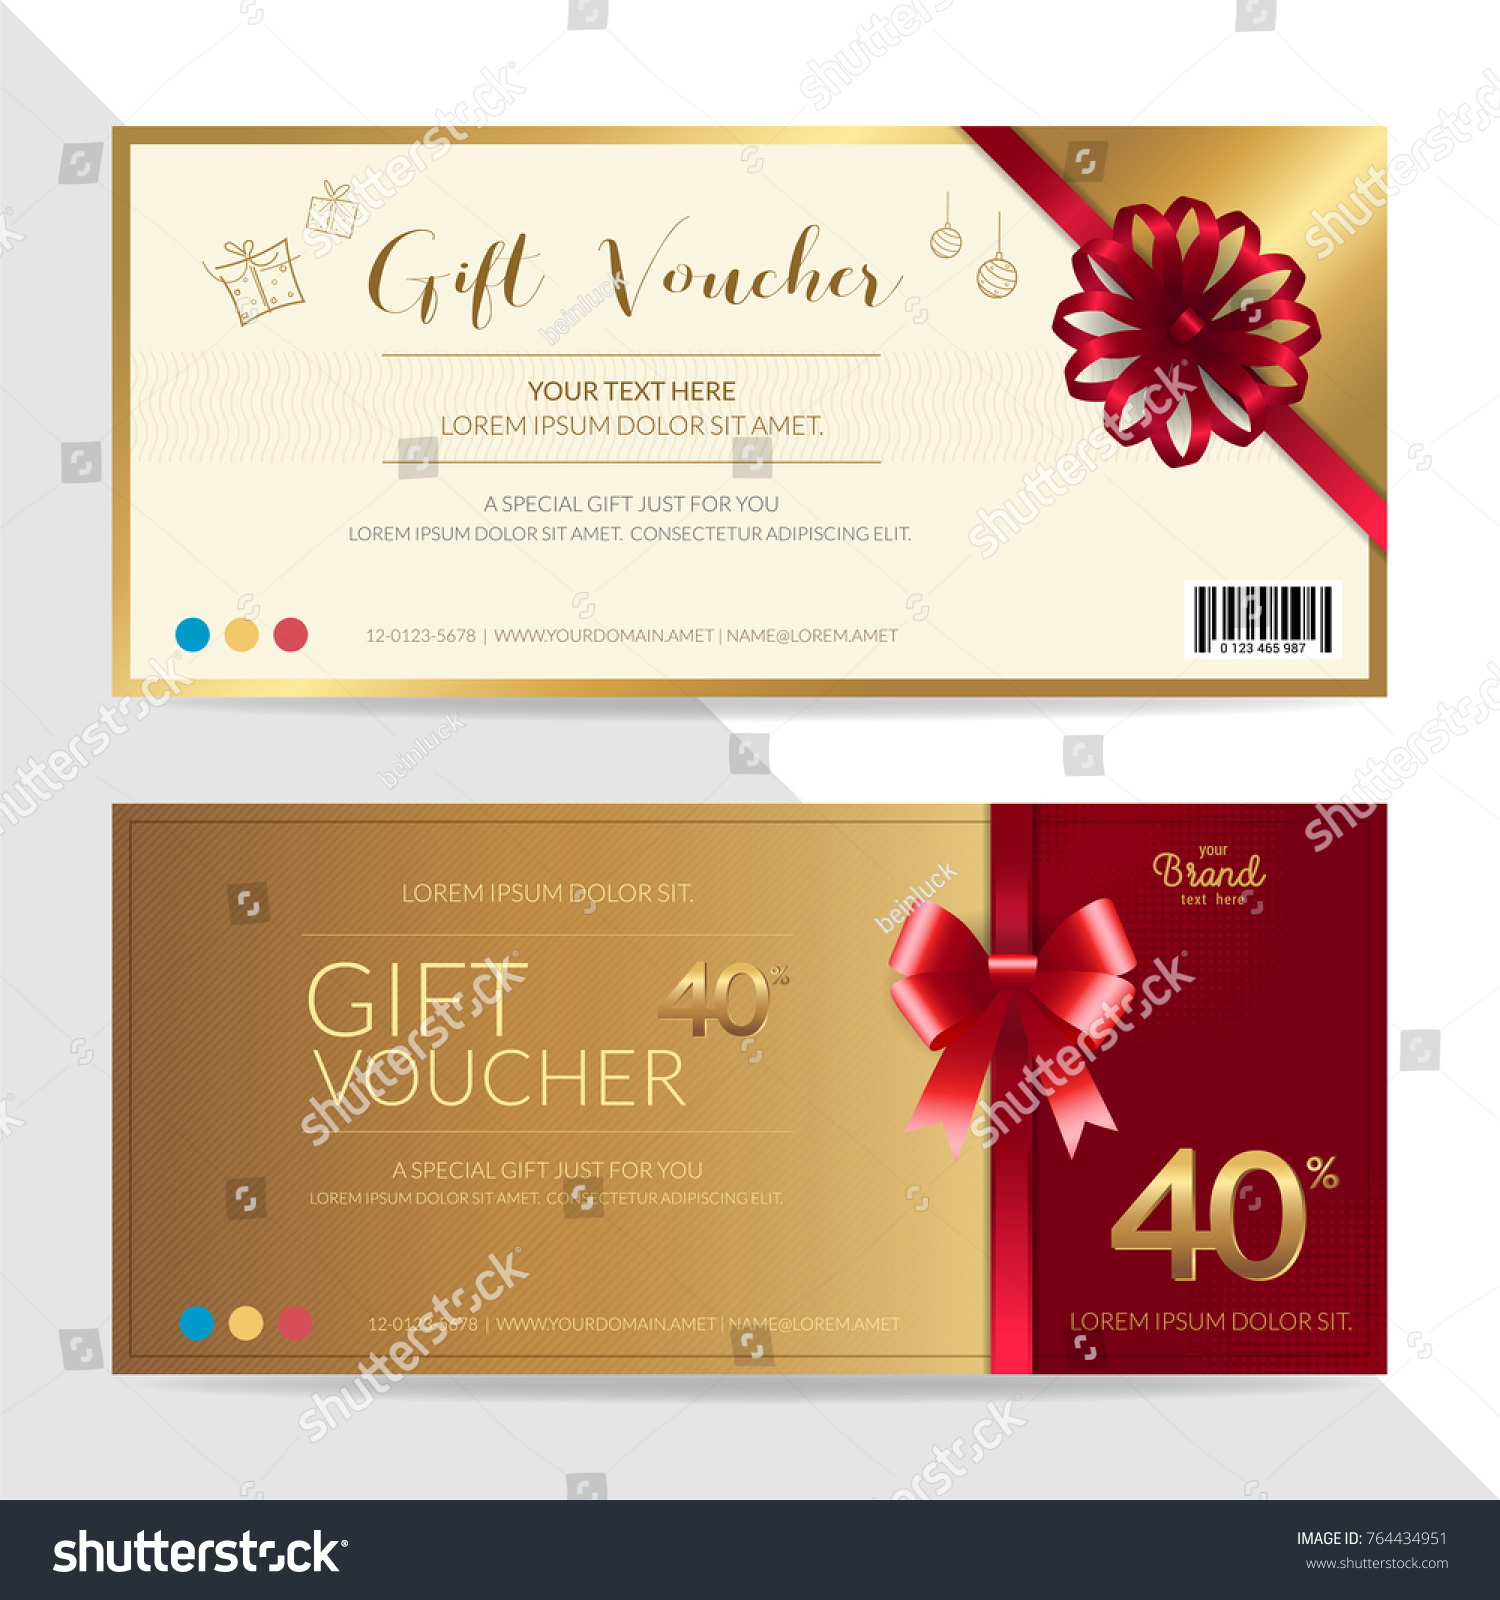 Money Gift Certificate Template from image.shutterstock.com